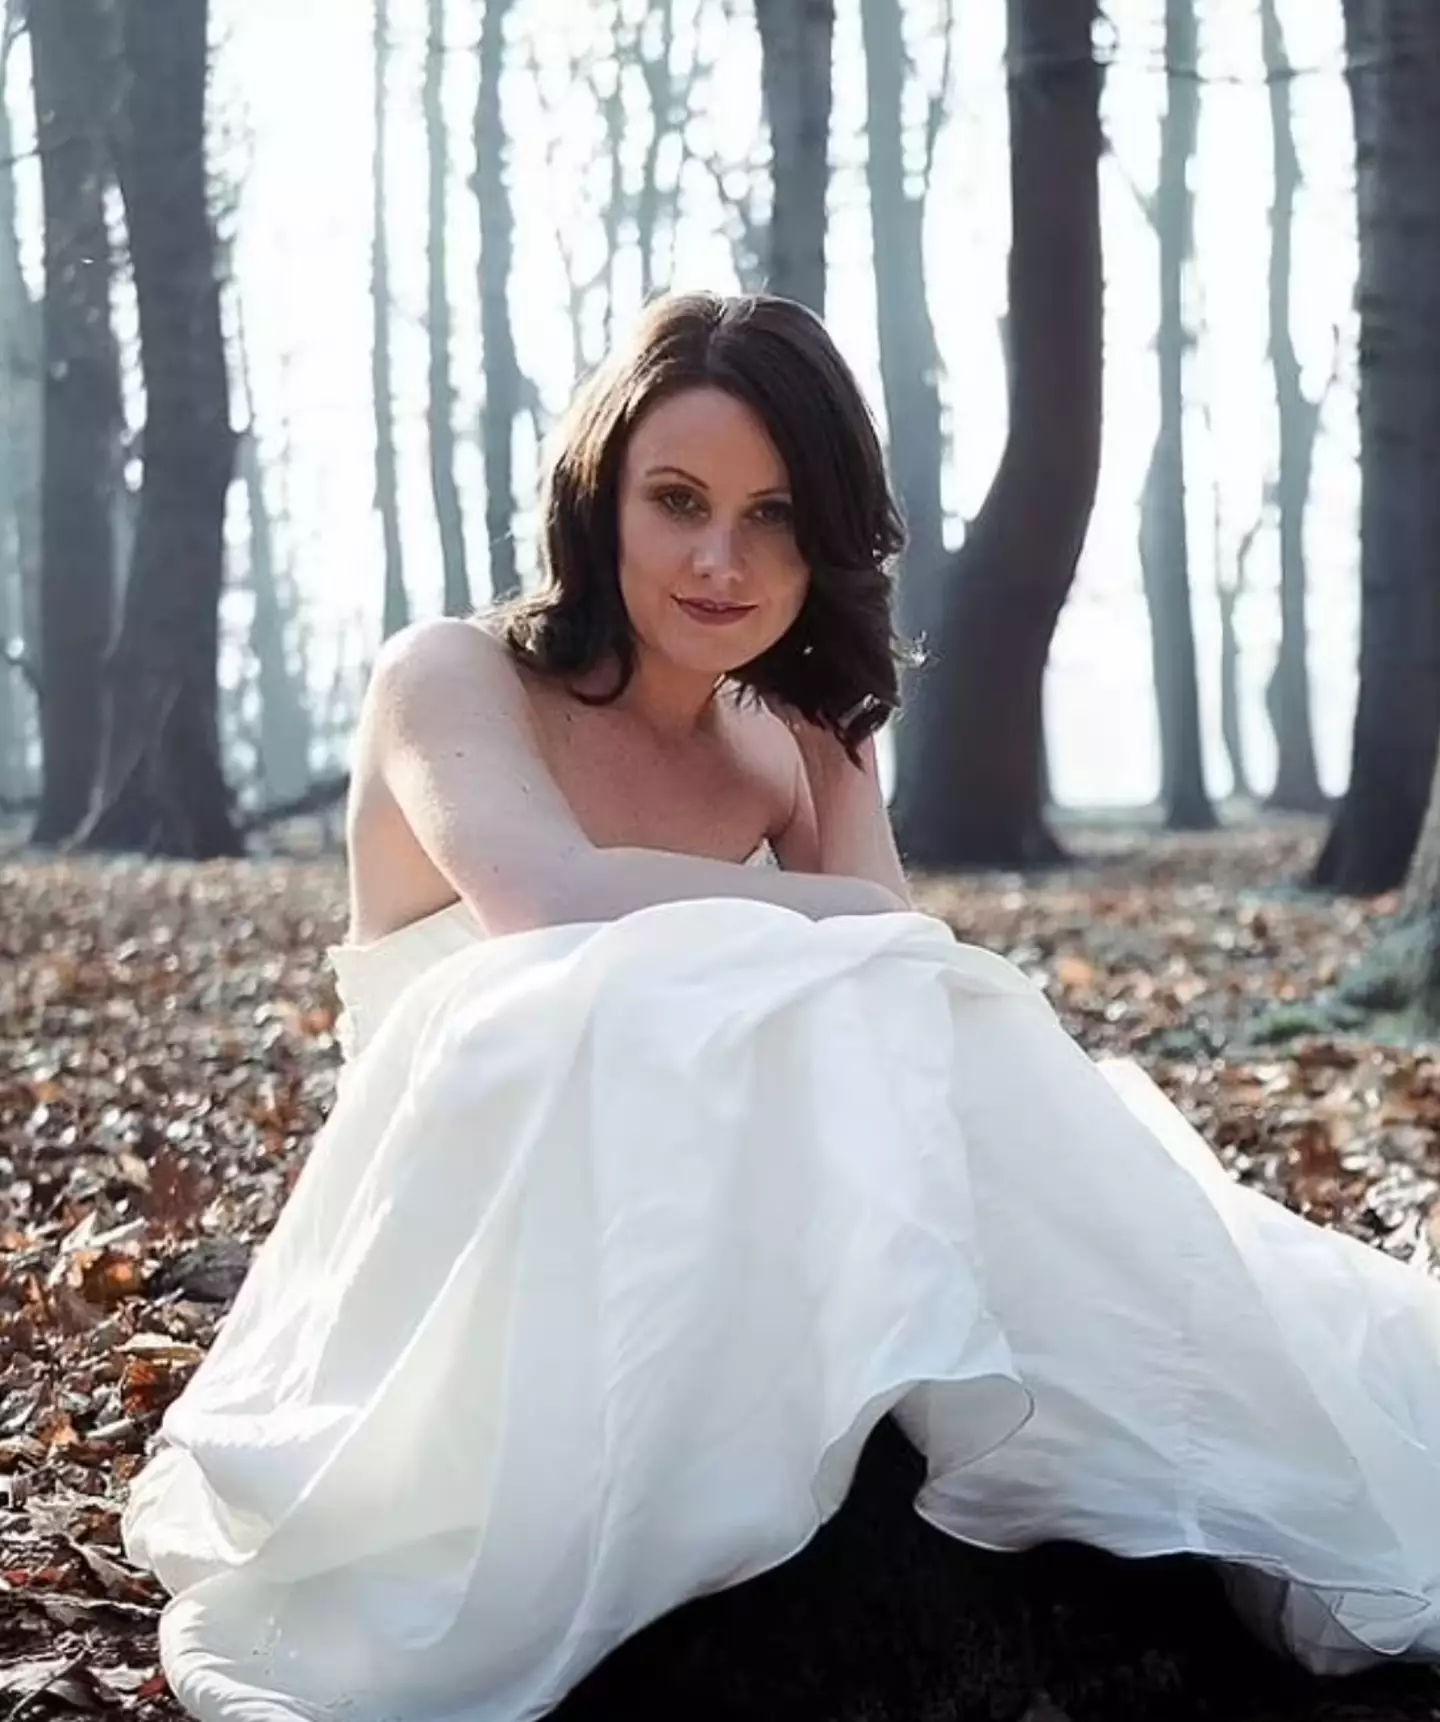 Emma had a photoshoot in her wedding dress before burning it.